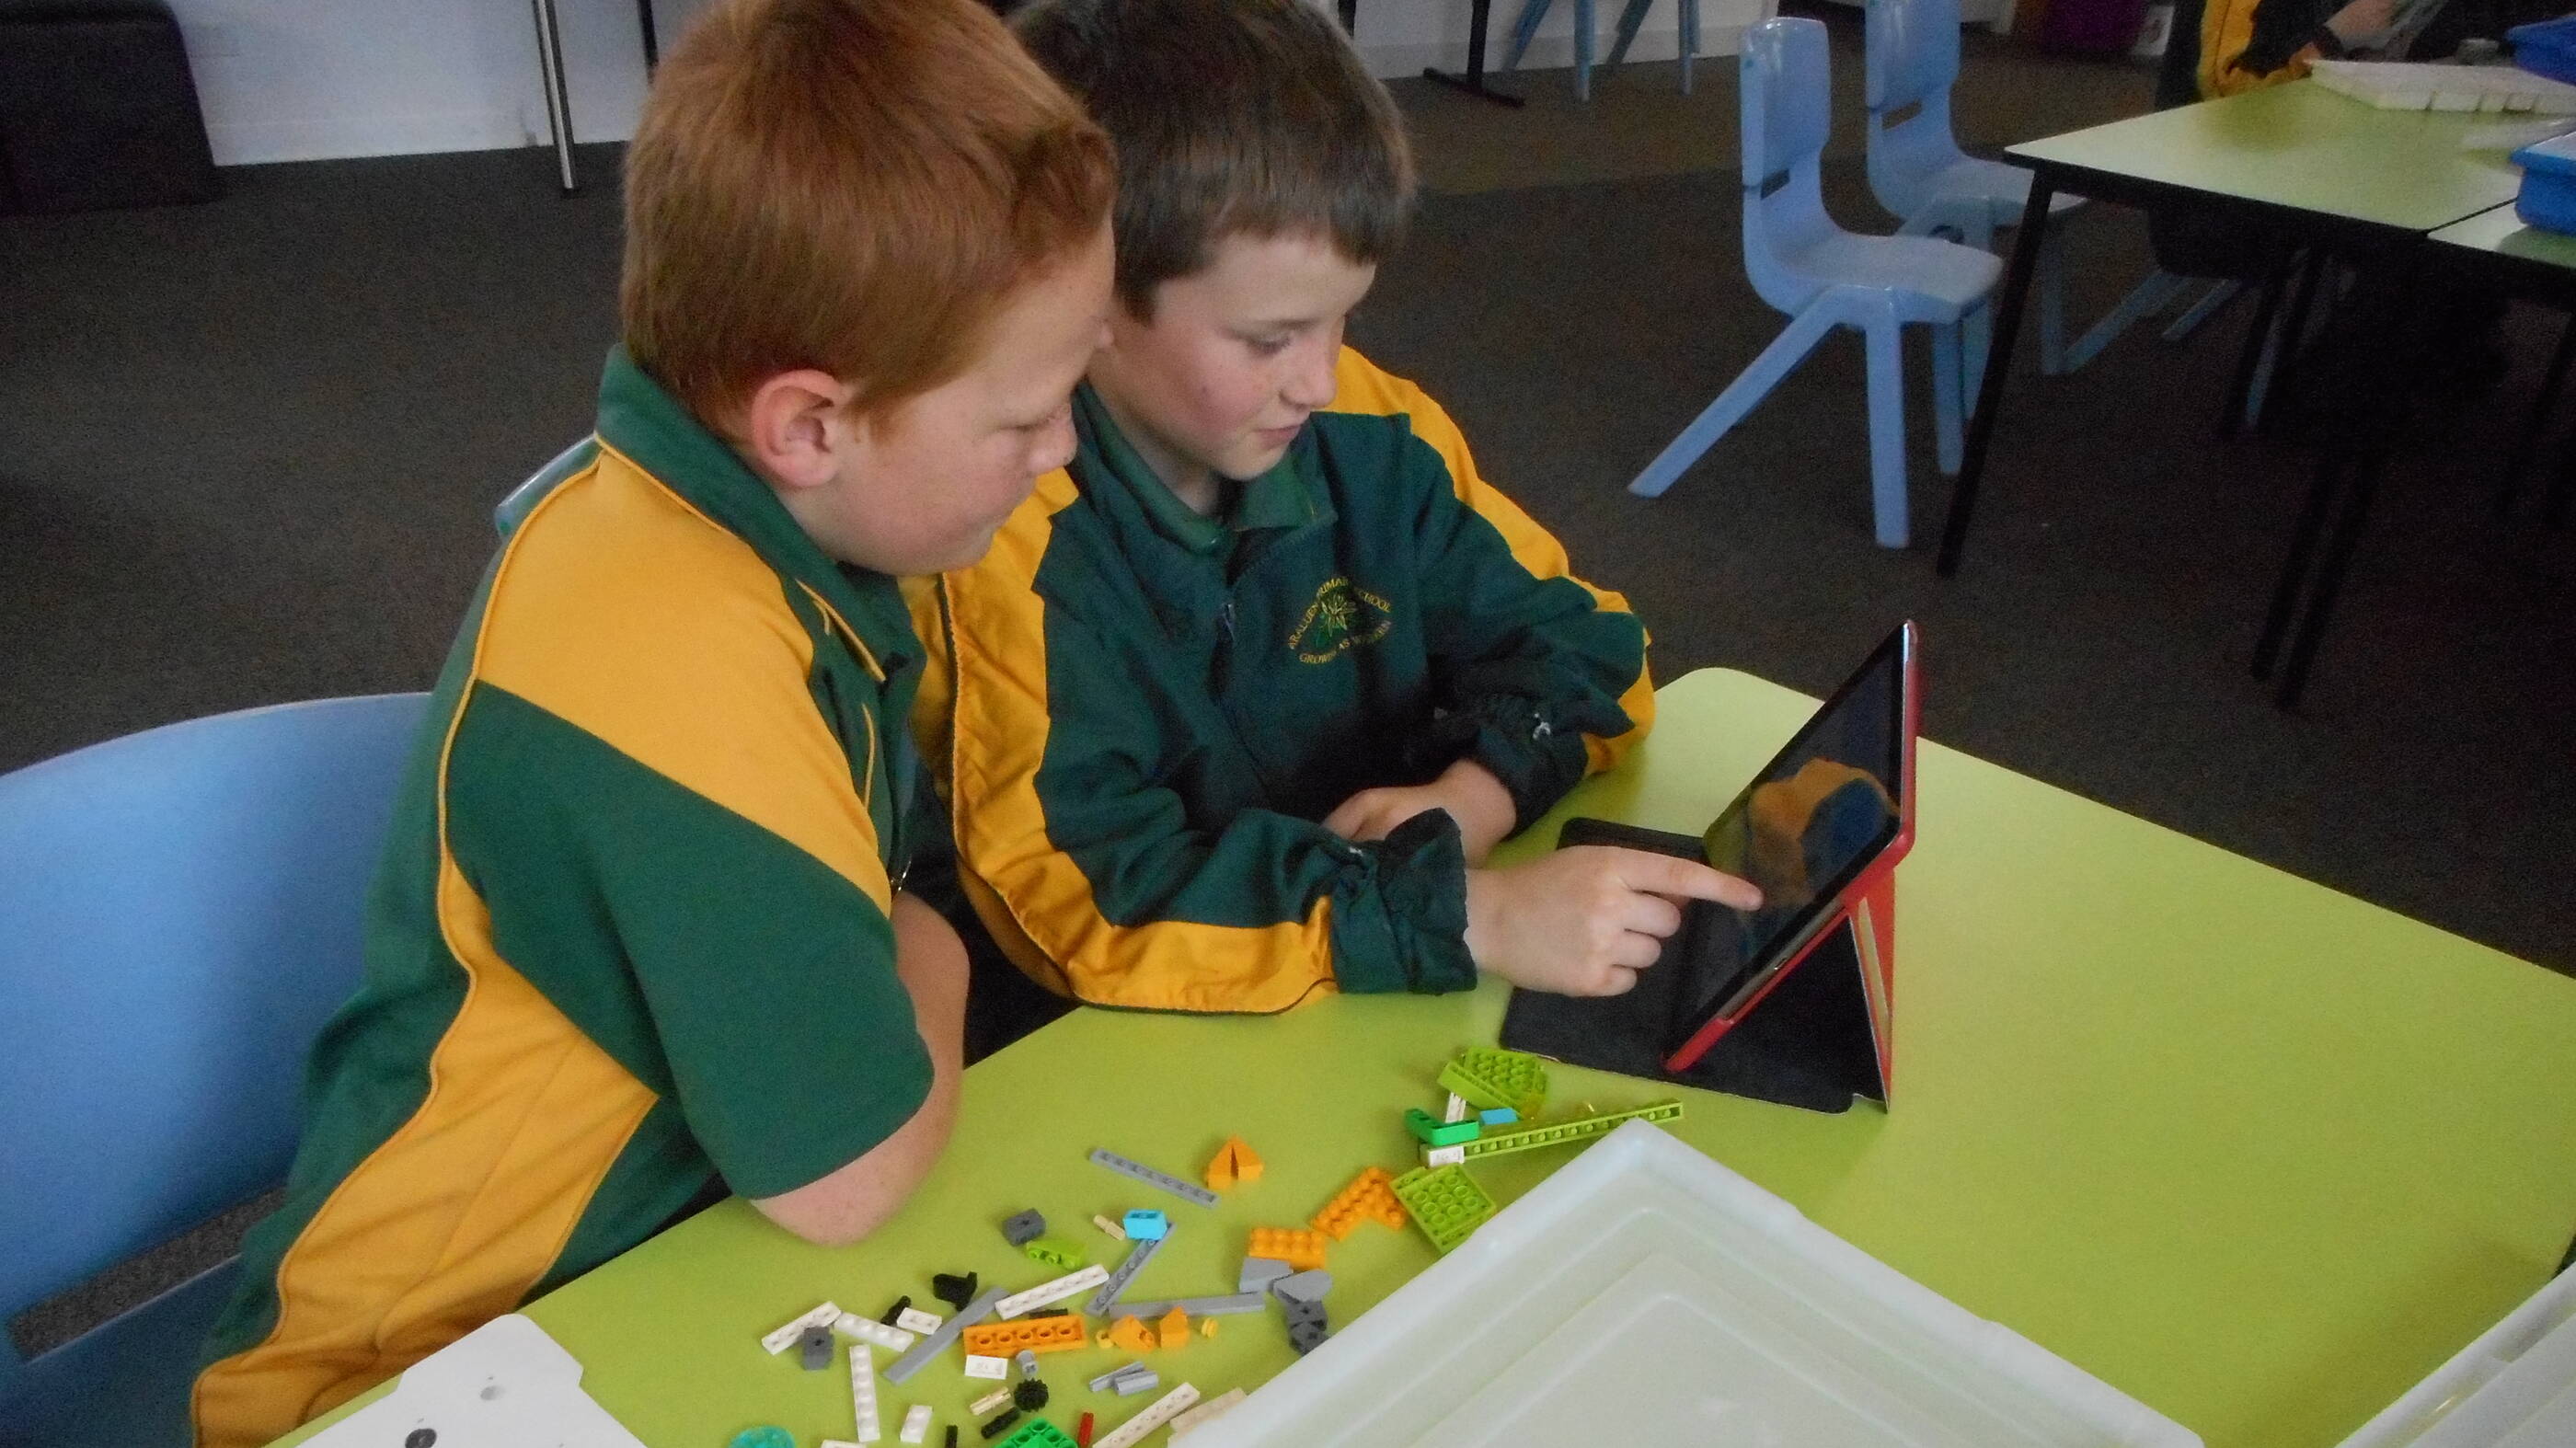 Image Photo — Araluen Primary School was one of several Gippsland schools to receive an Esso Bright Future Grant to enhance its STEM projects.